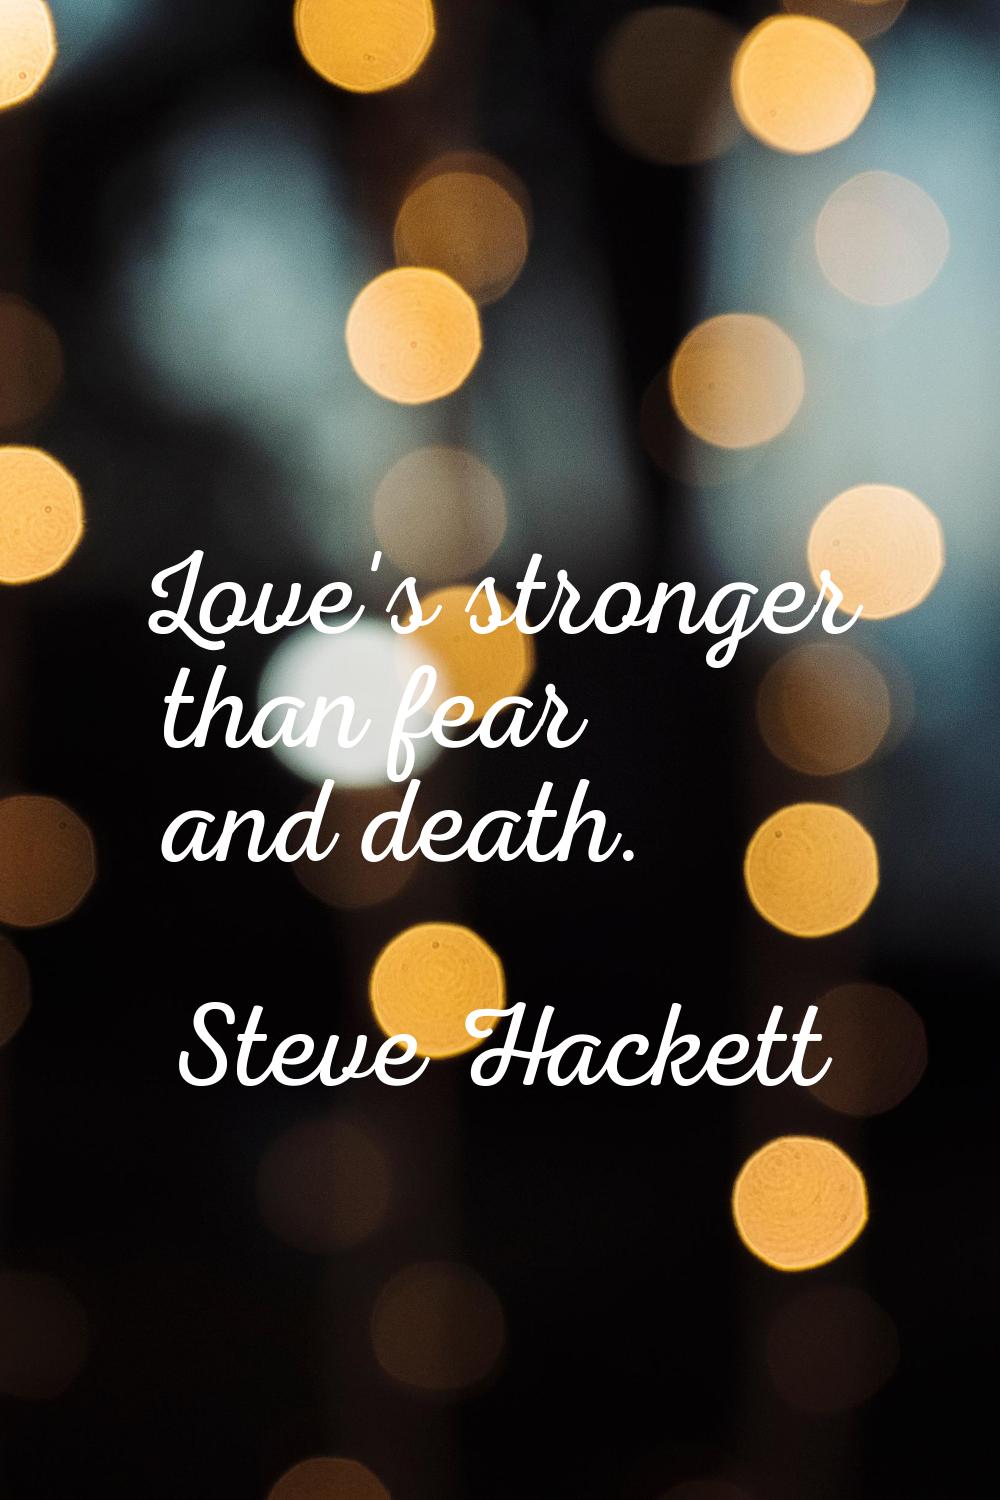 Love's stronger than fear and death.